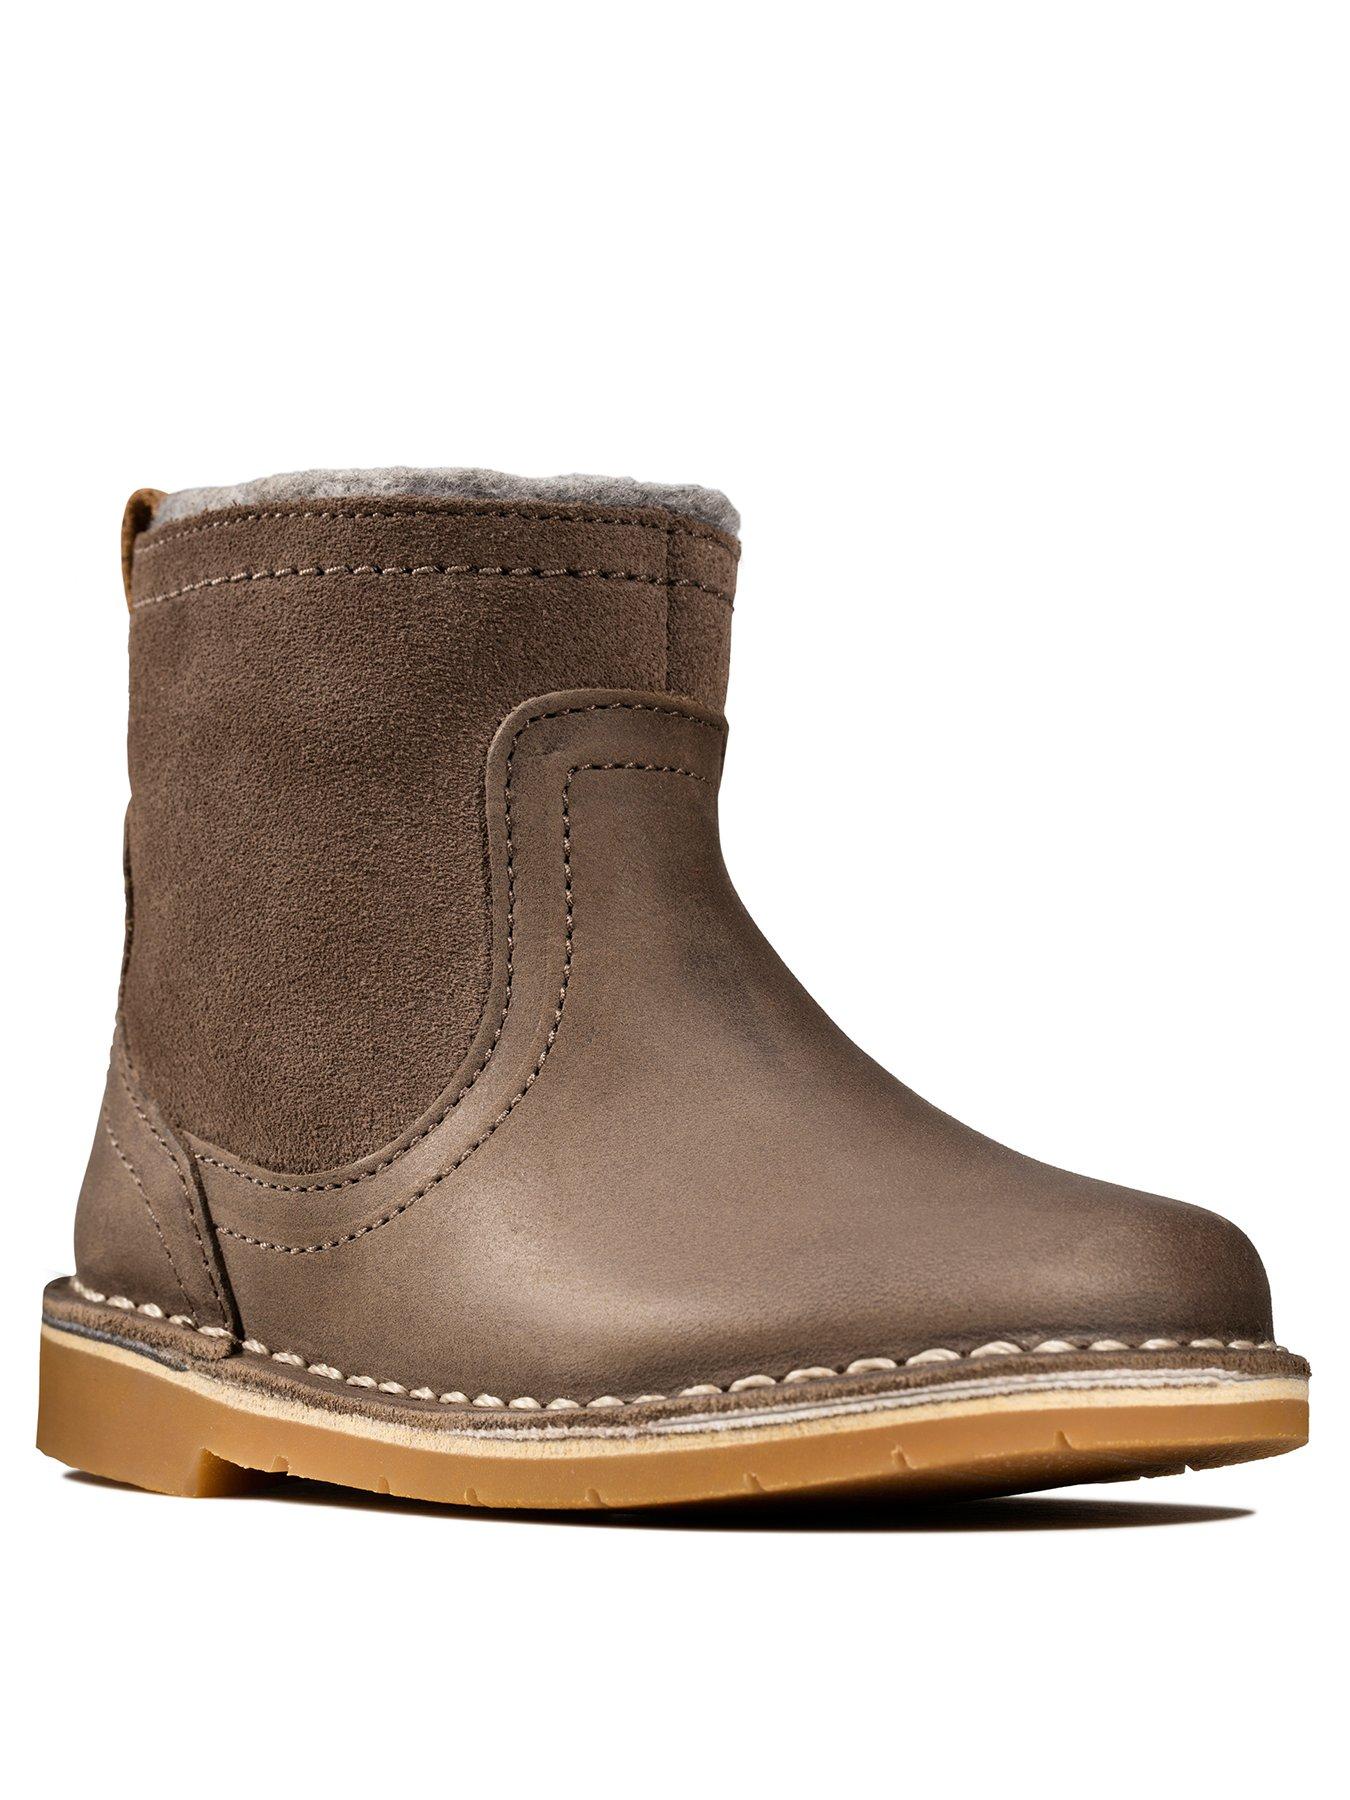 clarks boots for girls